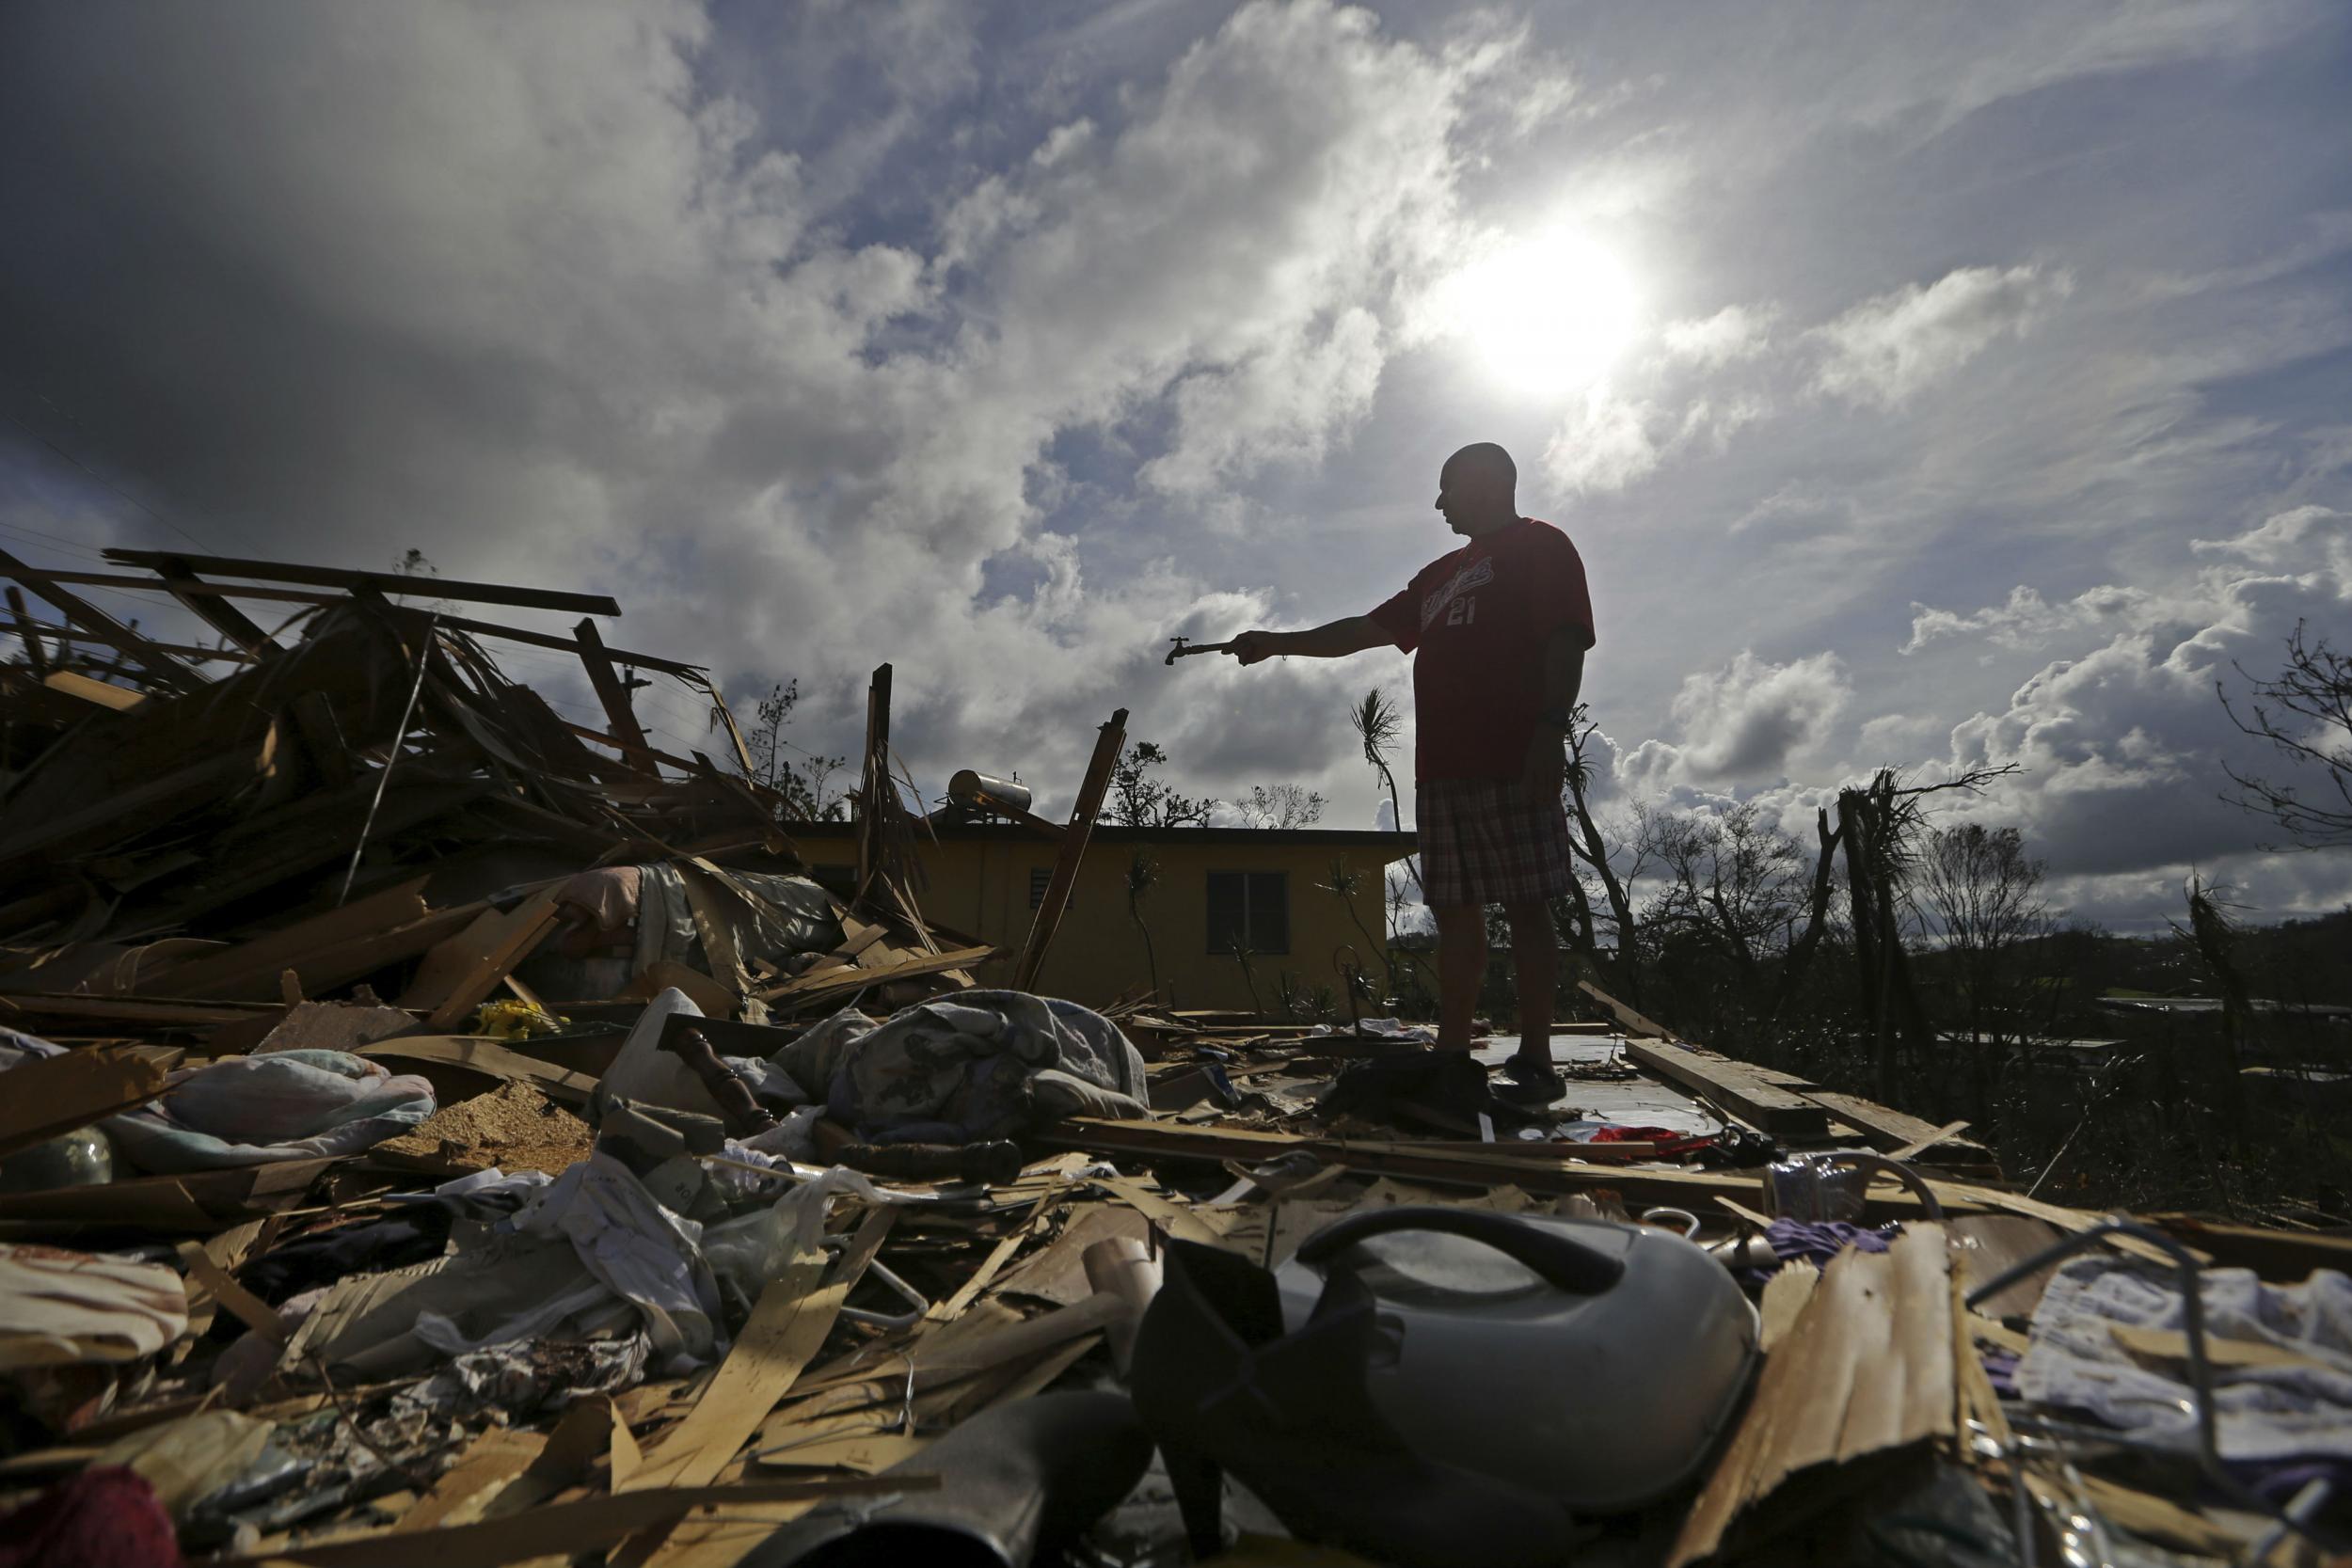 A Puerto Rican man amid the remains of his destroyed home in Aibonito, Puerto Rico on Monday, Sept. 25, 2017. Mr Trump plans to visit the island